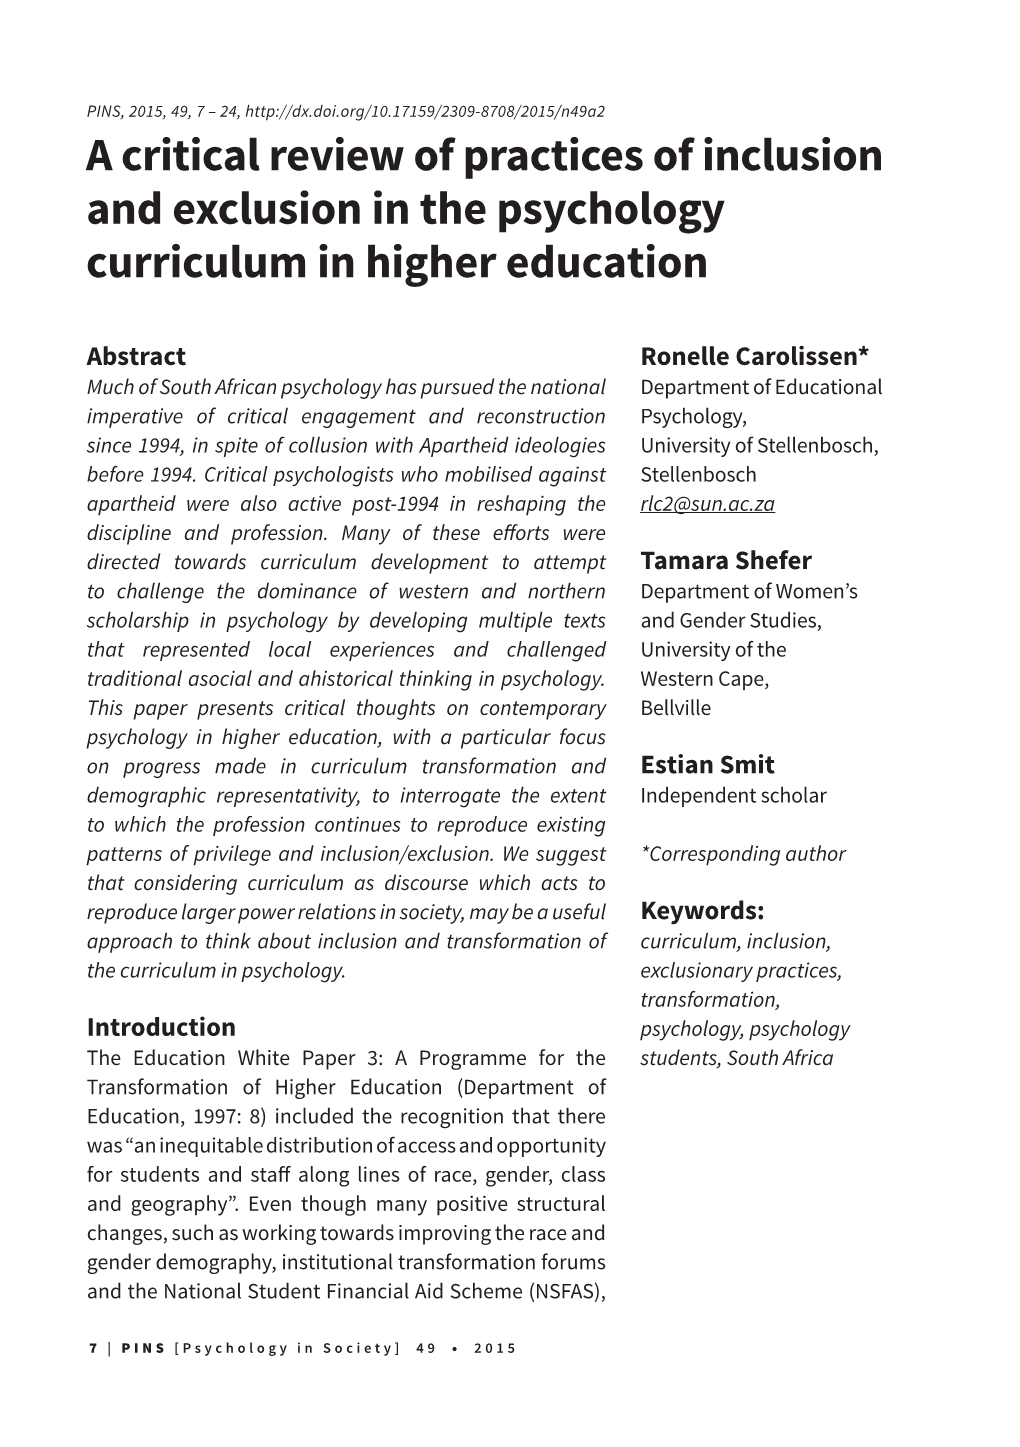 A Critical Review of Practices of Inclusion and Exclusion in the Psychology Curriculum in Higher Education